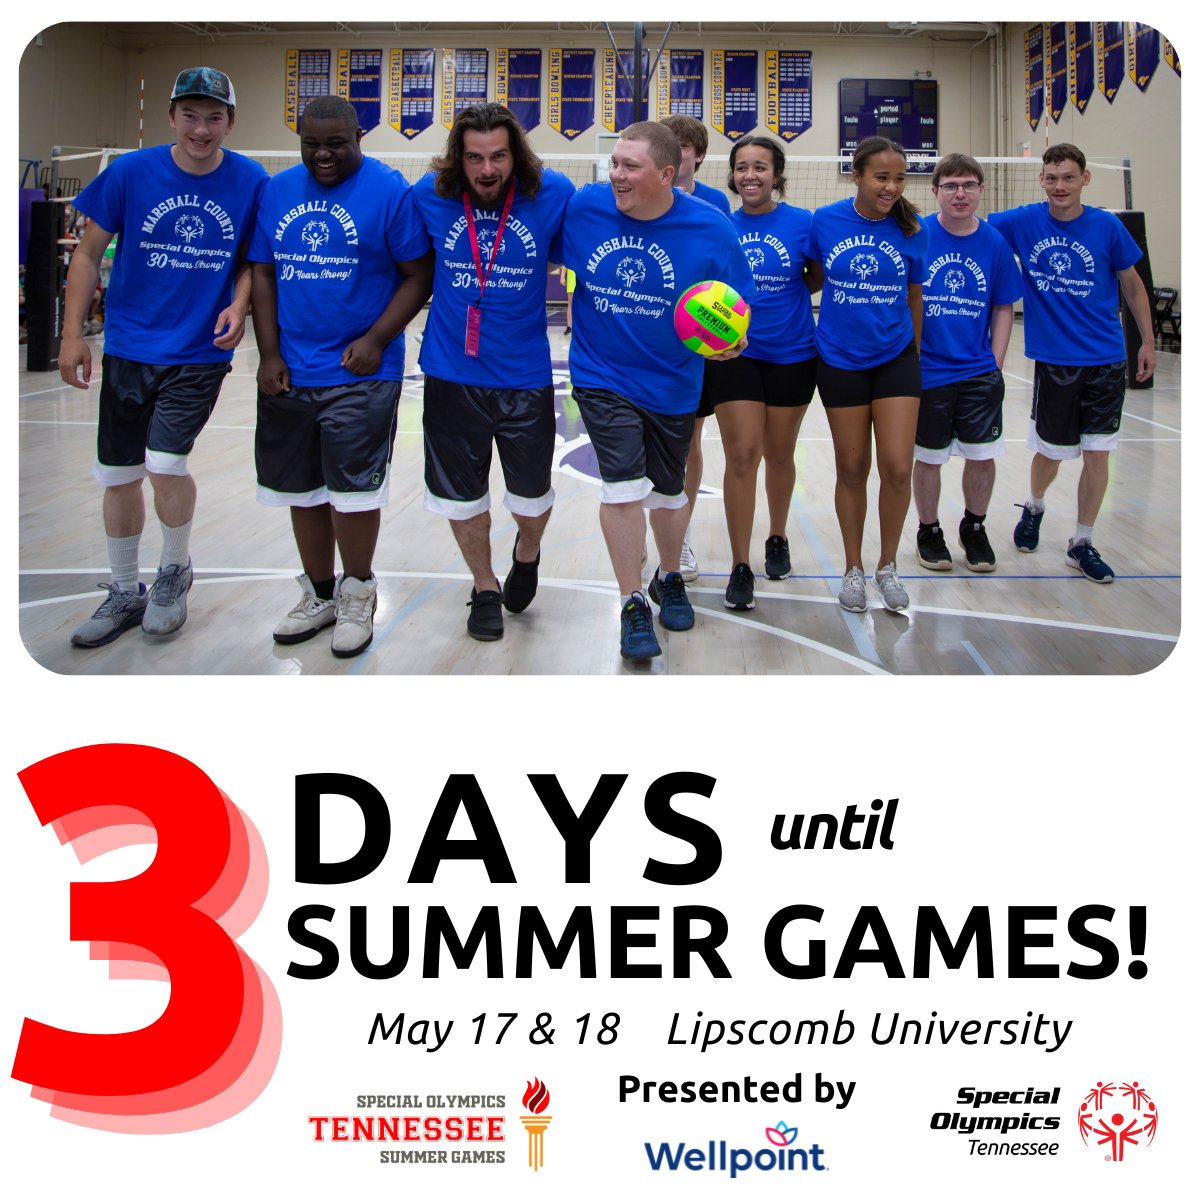 We're only THREE days away from State Summer Games presented by Wellpoint Tennessee. Will we see you there? Learn more: specialolympicstn.org/summergames